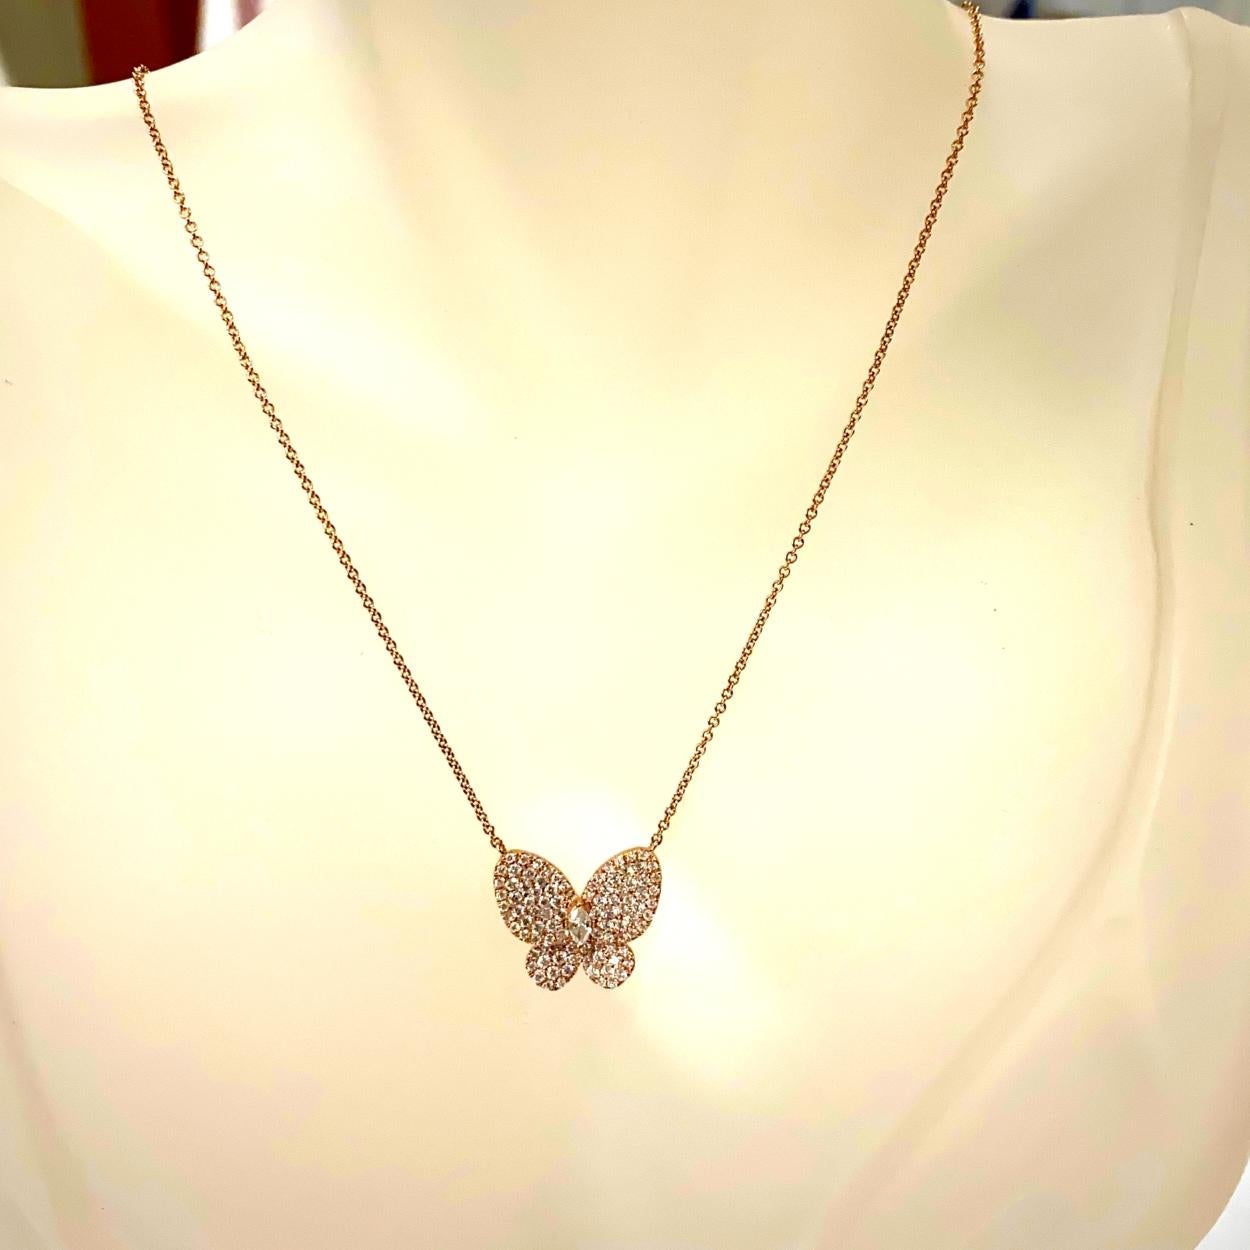 14K Gold Beautiful Pave Set Butterfly Necklace with a Marquise Diamond doubling as the body with total weight of 0.90 Ct.
Size 20mm x 18mm
Chain Length: 15 inch
Total Diamond Weight: 0.90 Ct